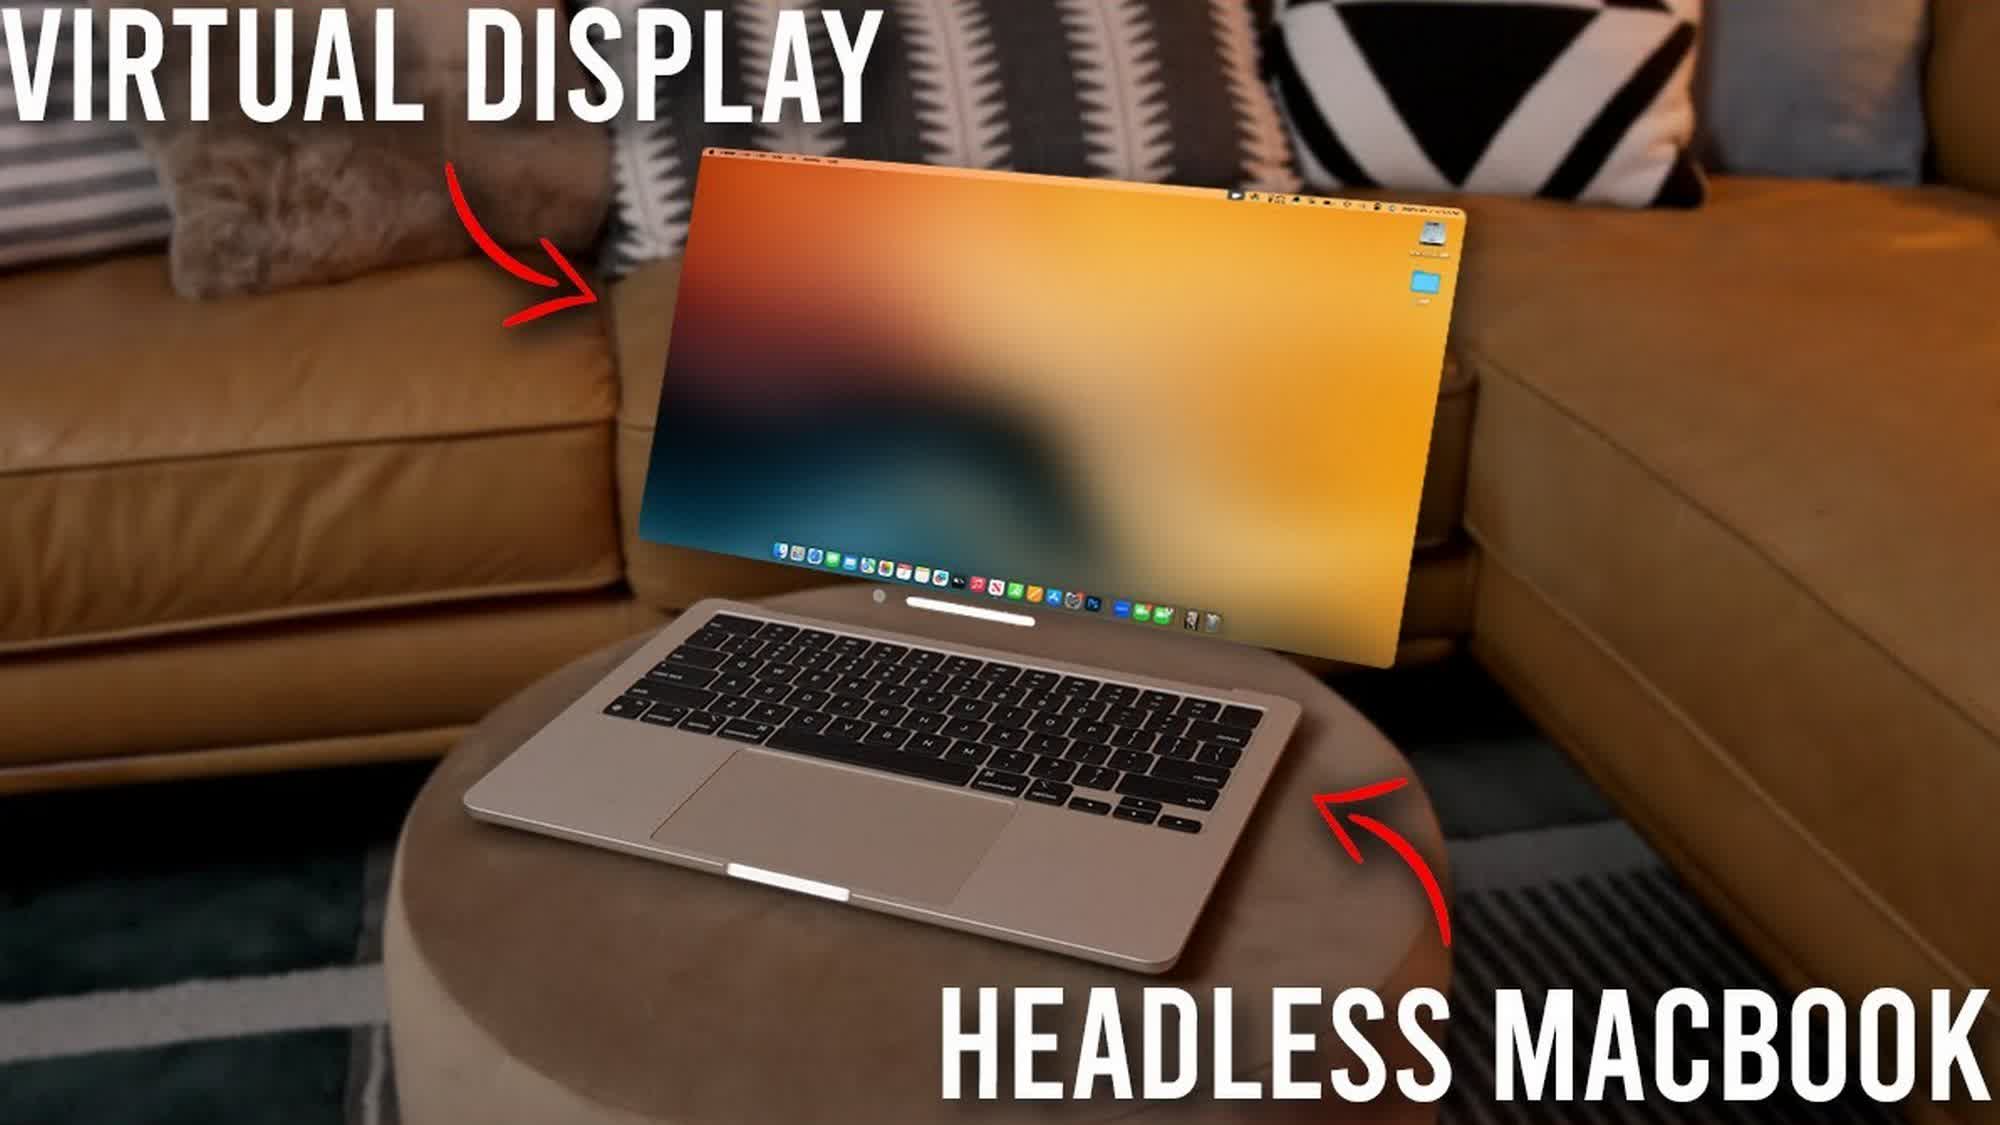 This is how you create a completely bezel-less virtual MacBook display